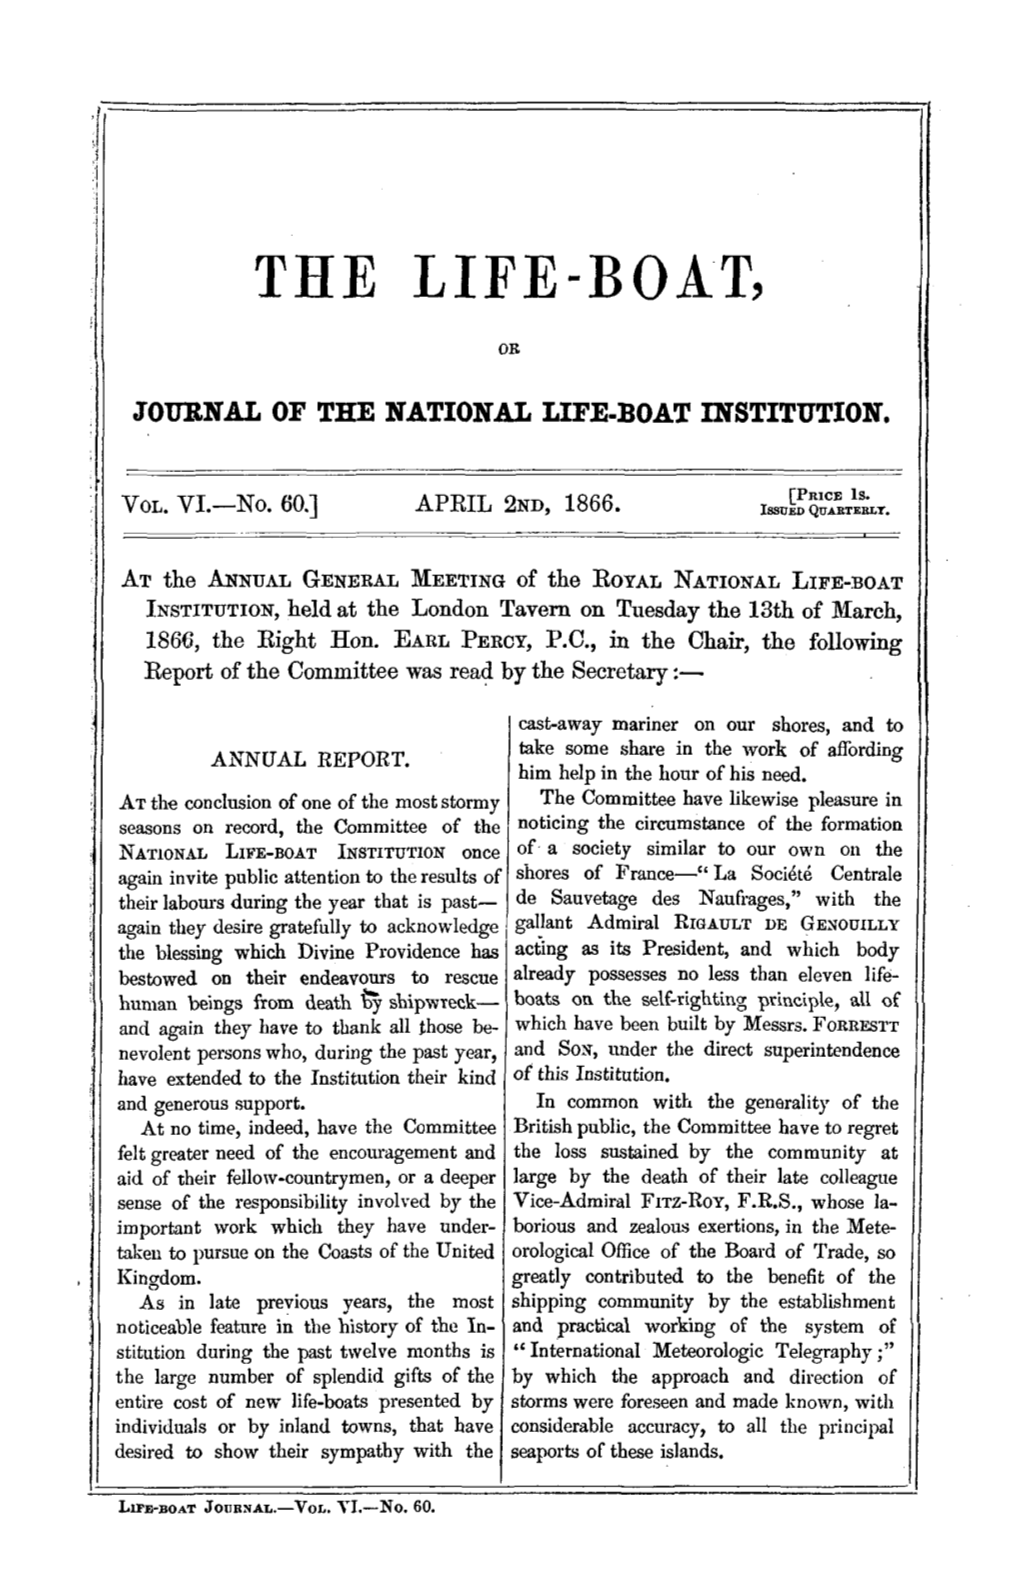 The Life-Boat